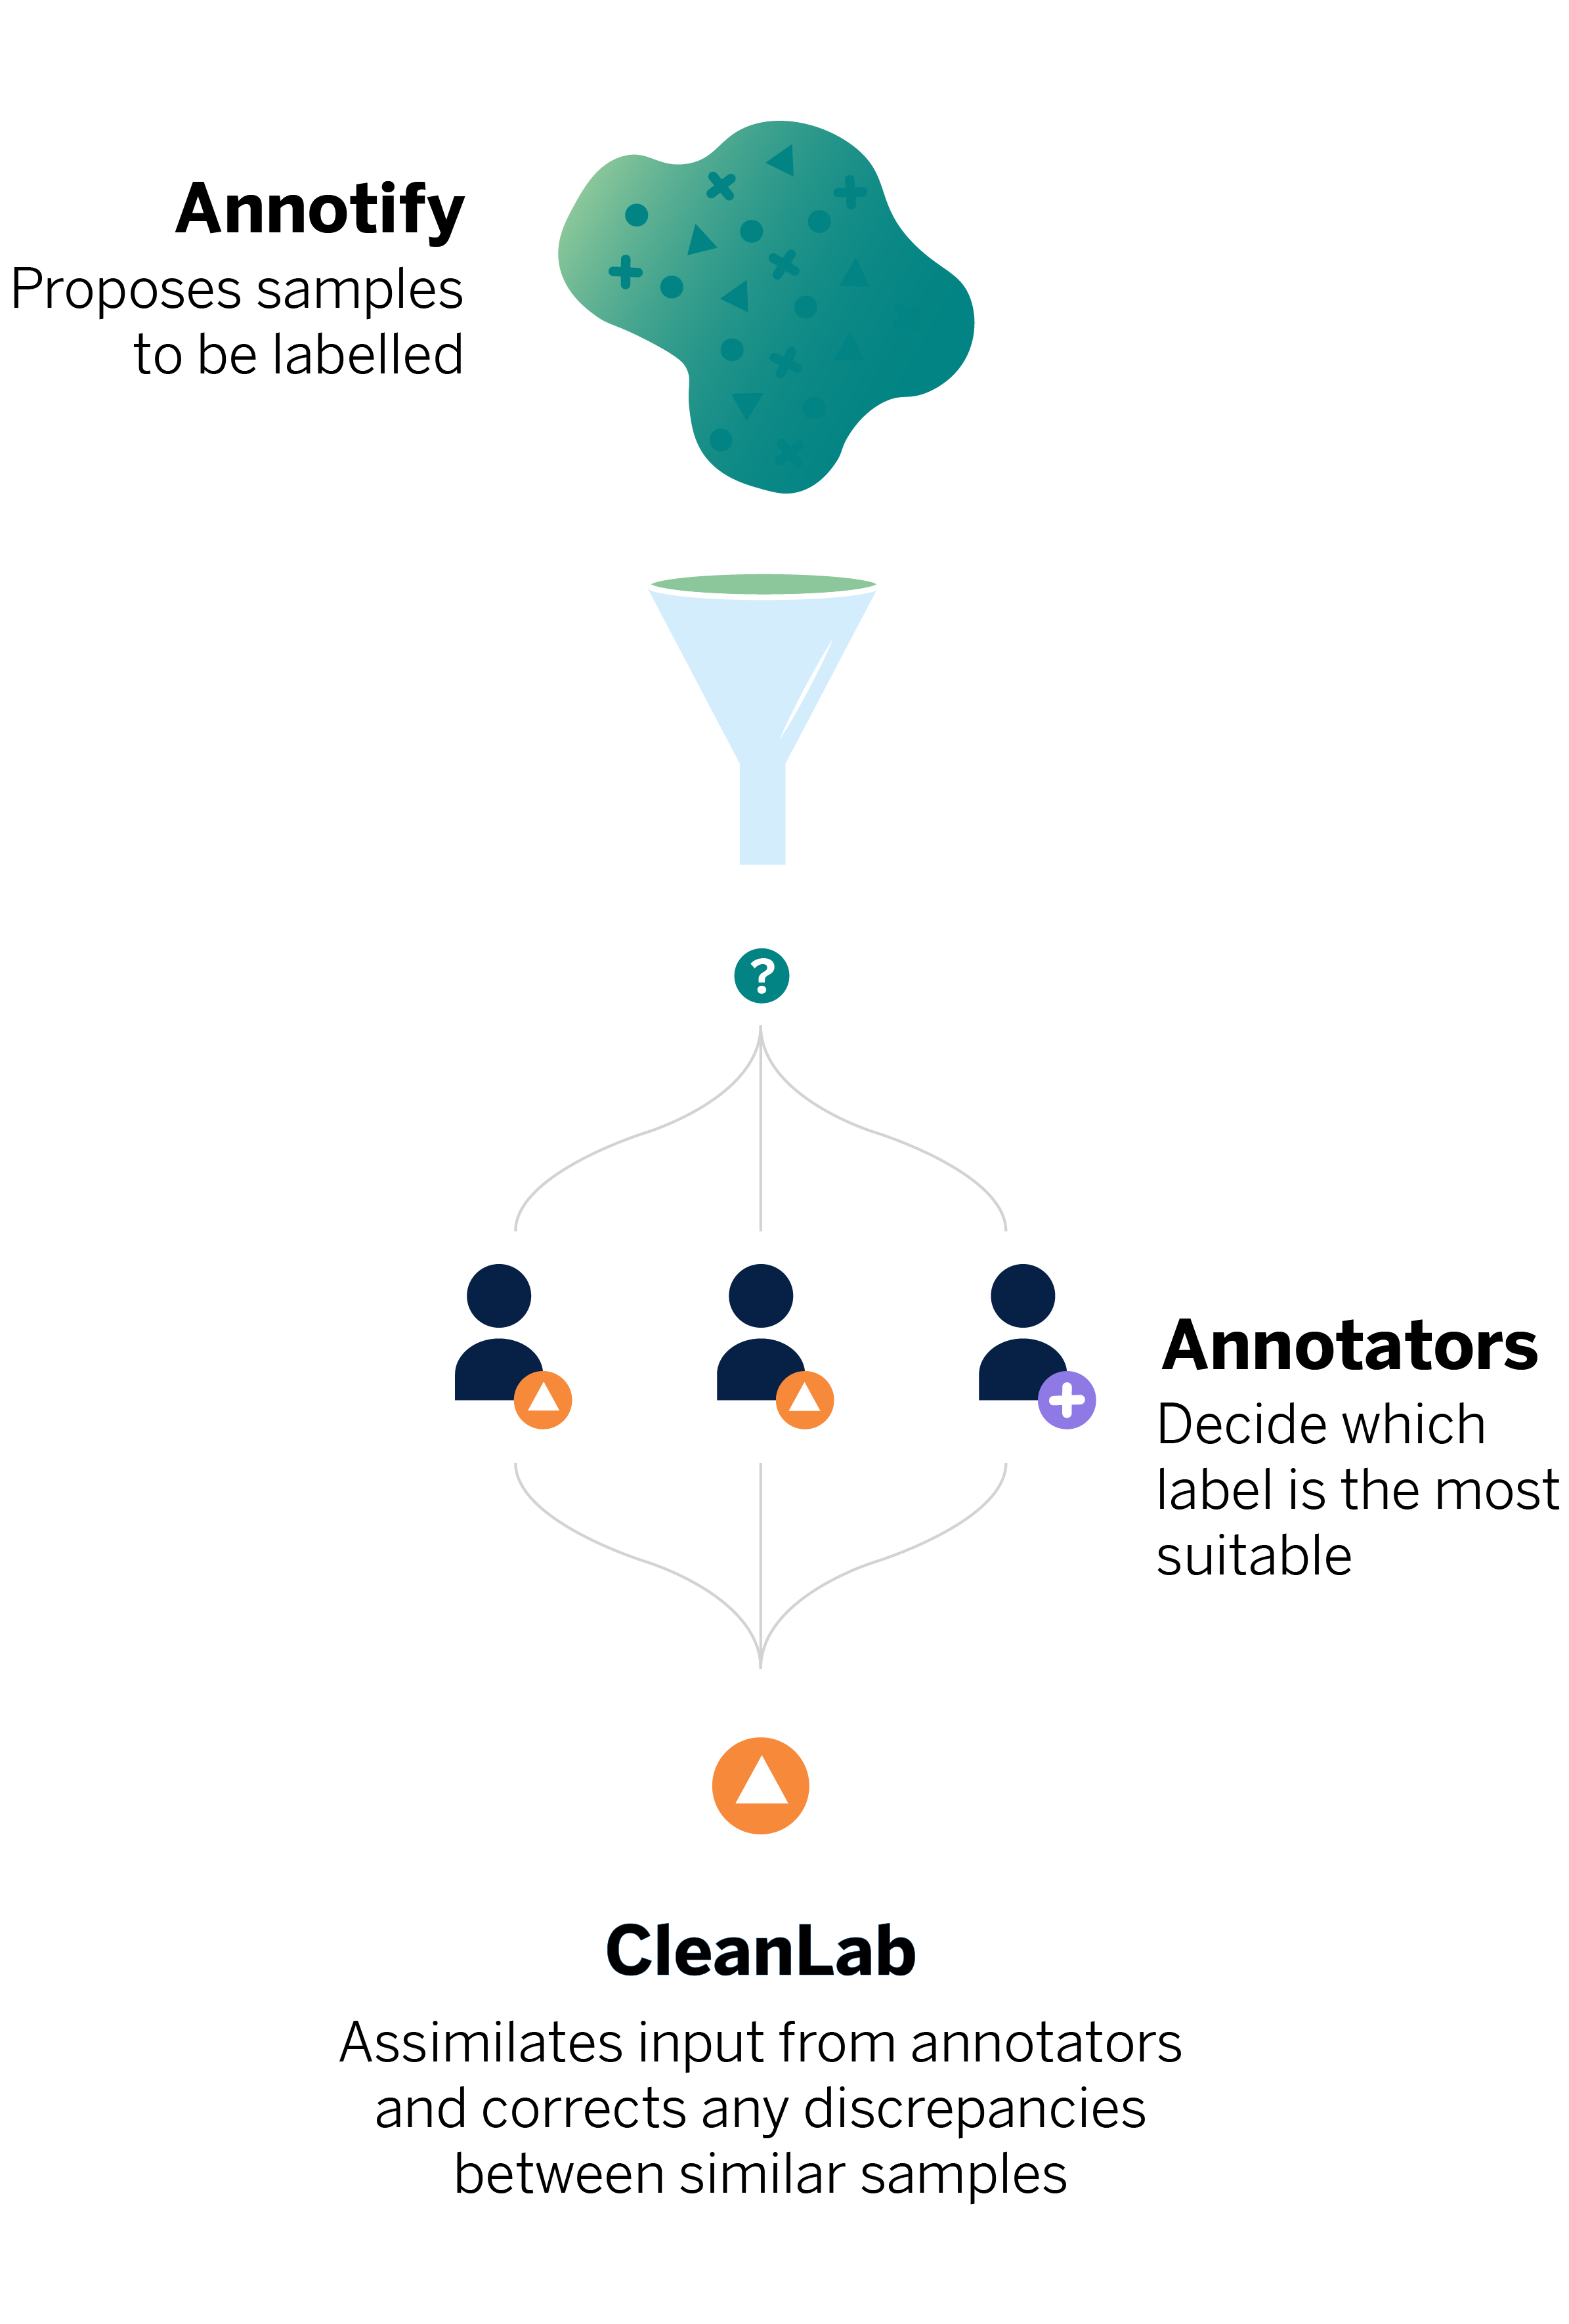 The samples proposed by Annotify are labeled by the annotators. Afterward, CleanLab resolves possible annotator discrepancies in labeling similar transactions (samples).